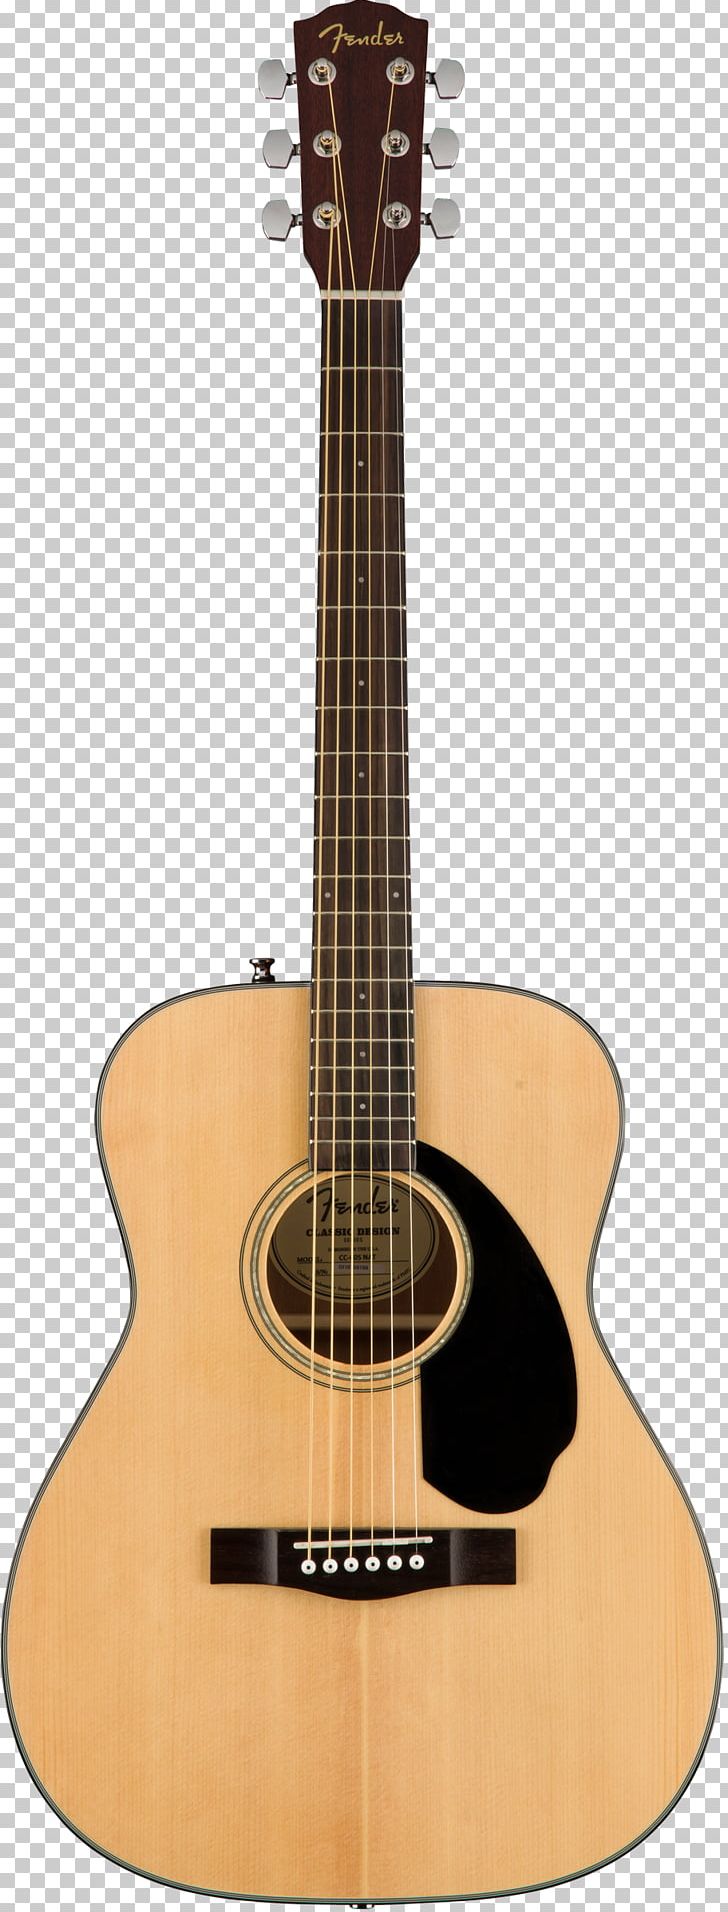 Steel-string Acoustic Guitar Fender Musical Instruments Corporation PNG, Clipart, Acoustic Electric Guitar, Cuatro, Guitar Accessory, Music, Musical Instrument Free PNG Download